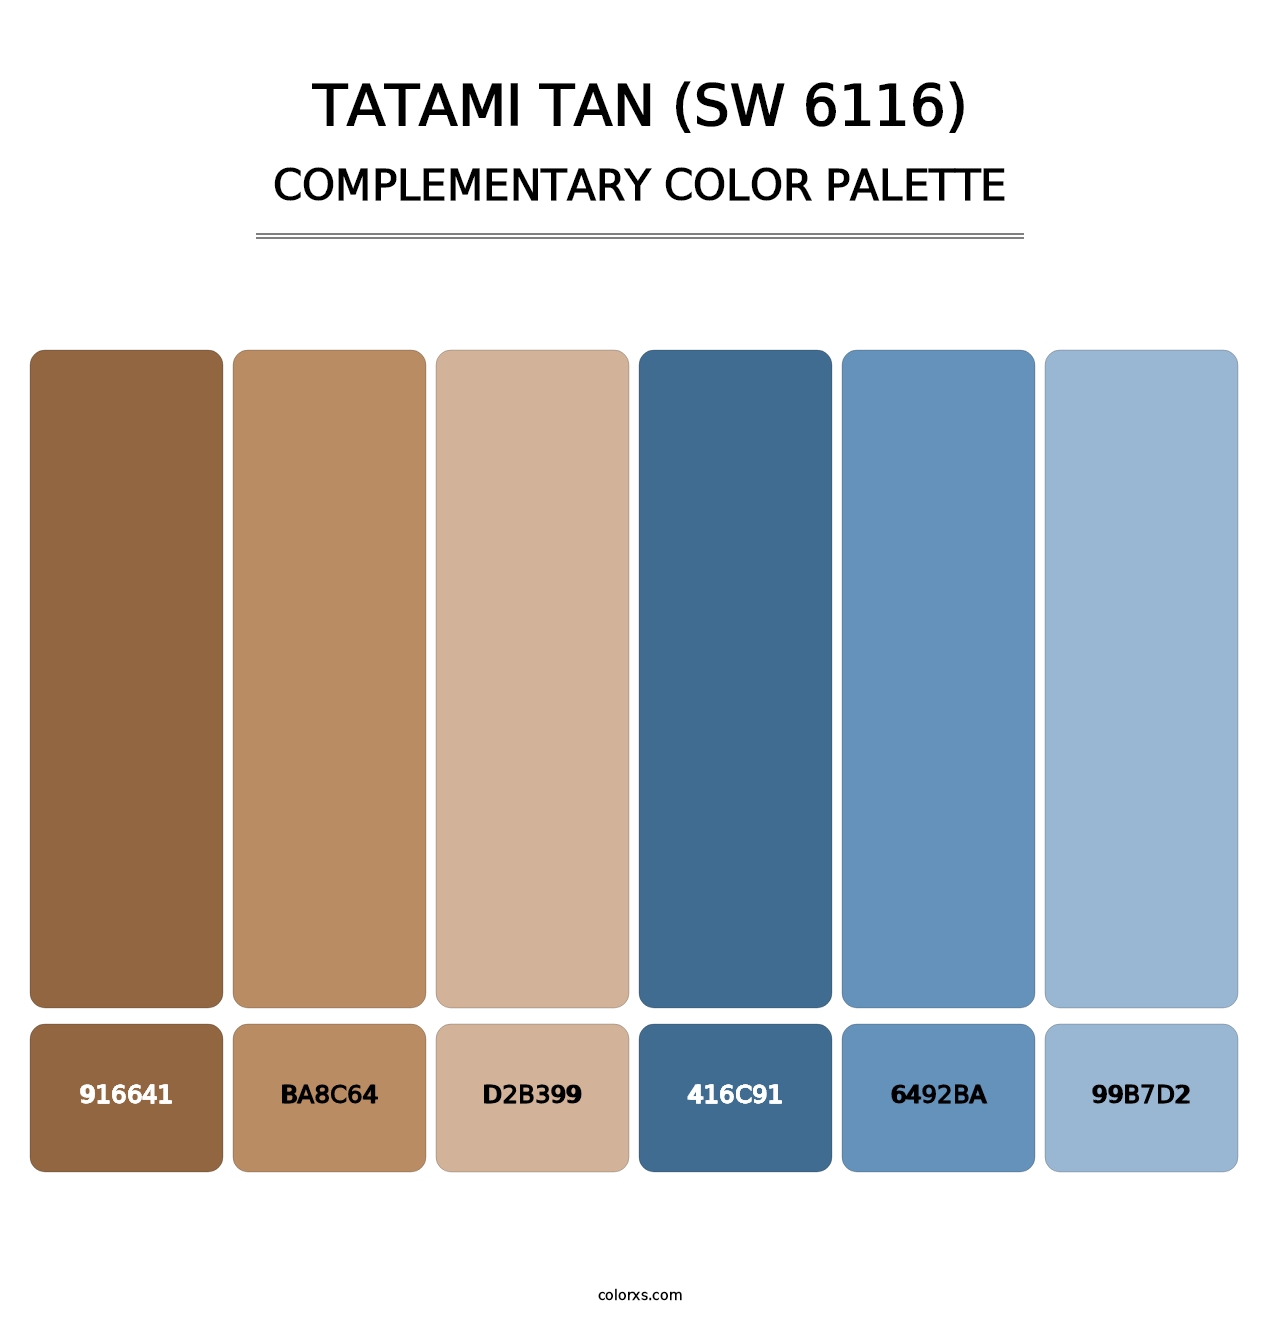 Tatami Tan (SW 6116) - Complementary Color Palette